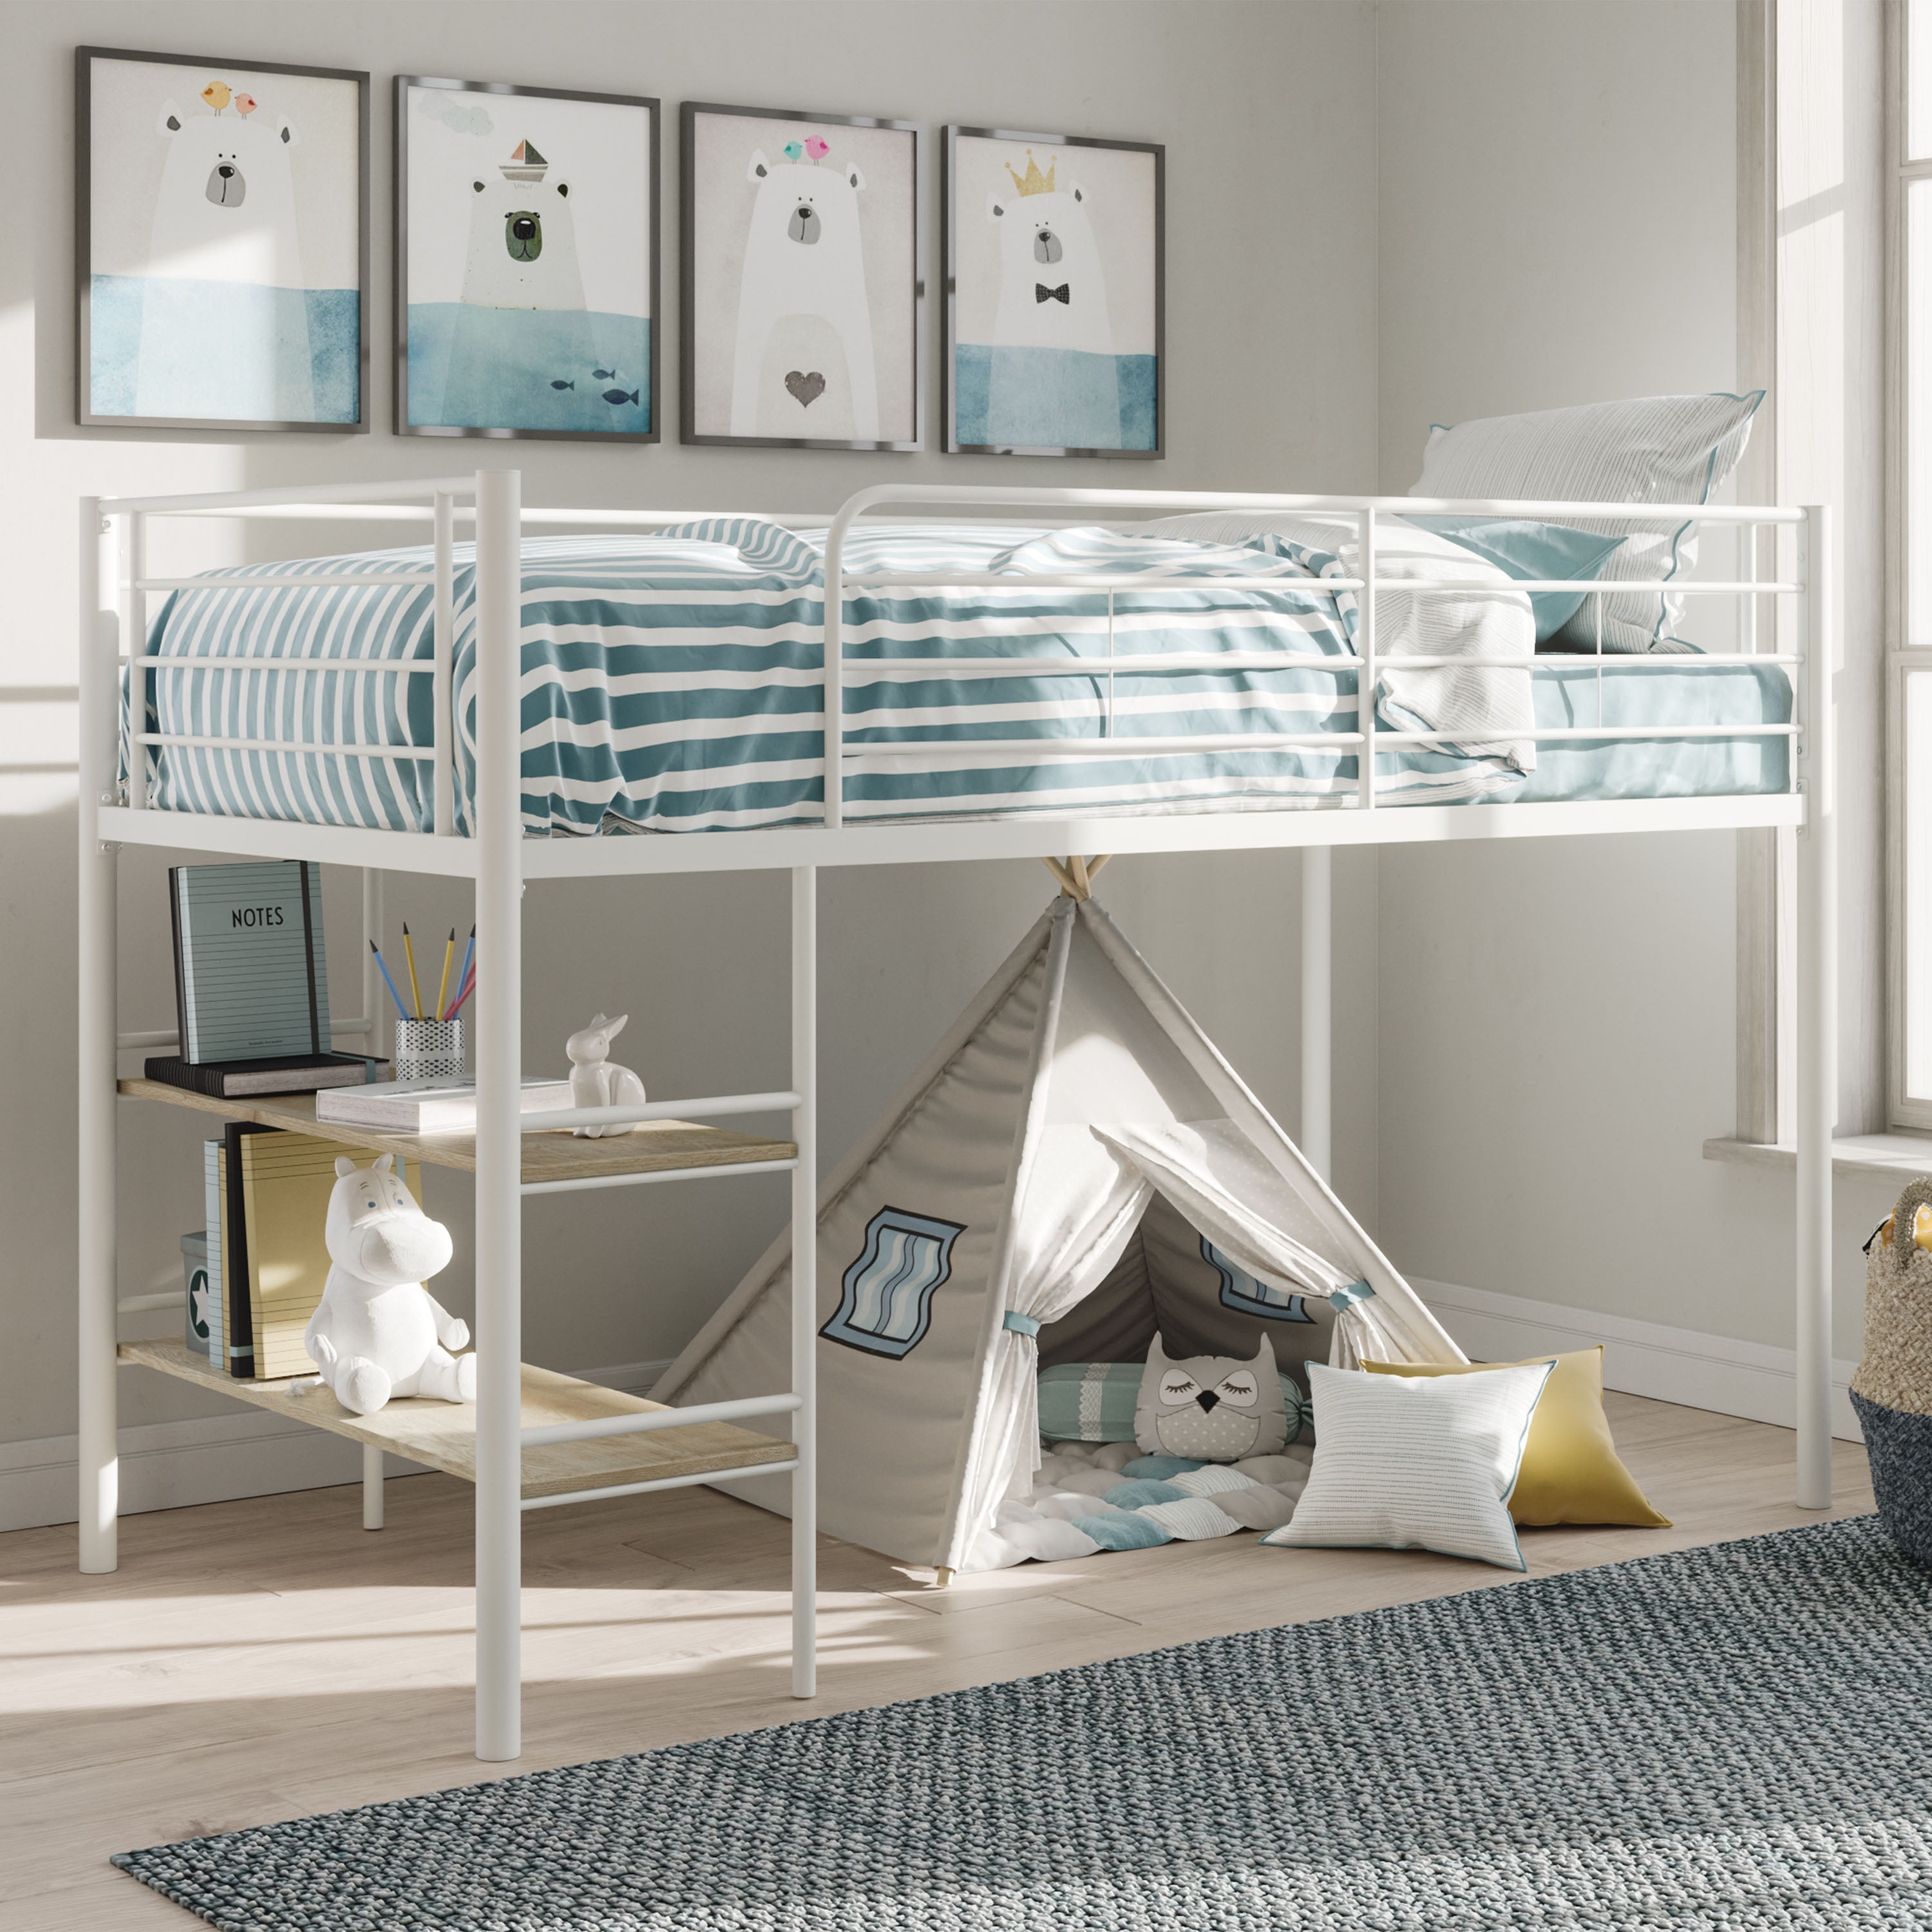 Your Zone Beckett Kids Metal Twin Loft, Your Zone Metal Loft Twin Bed Dimensions